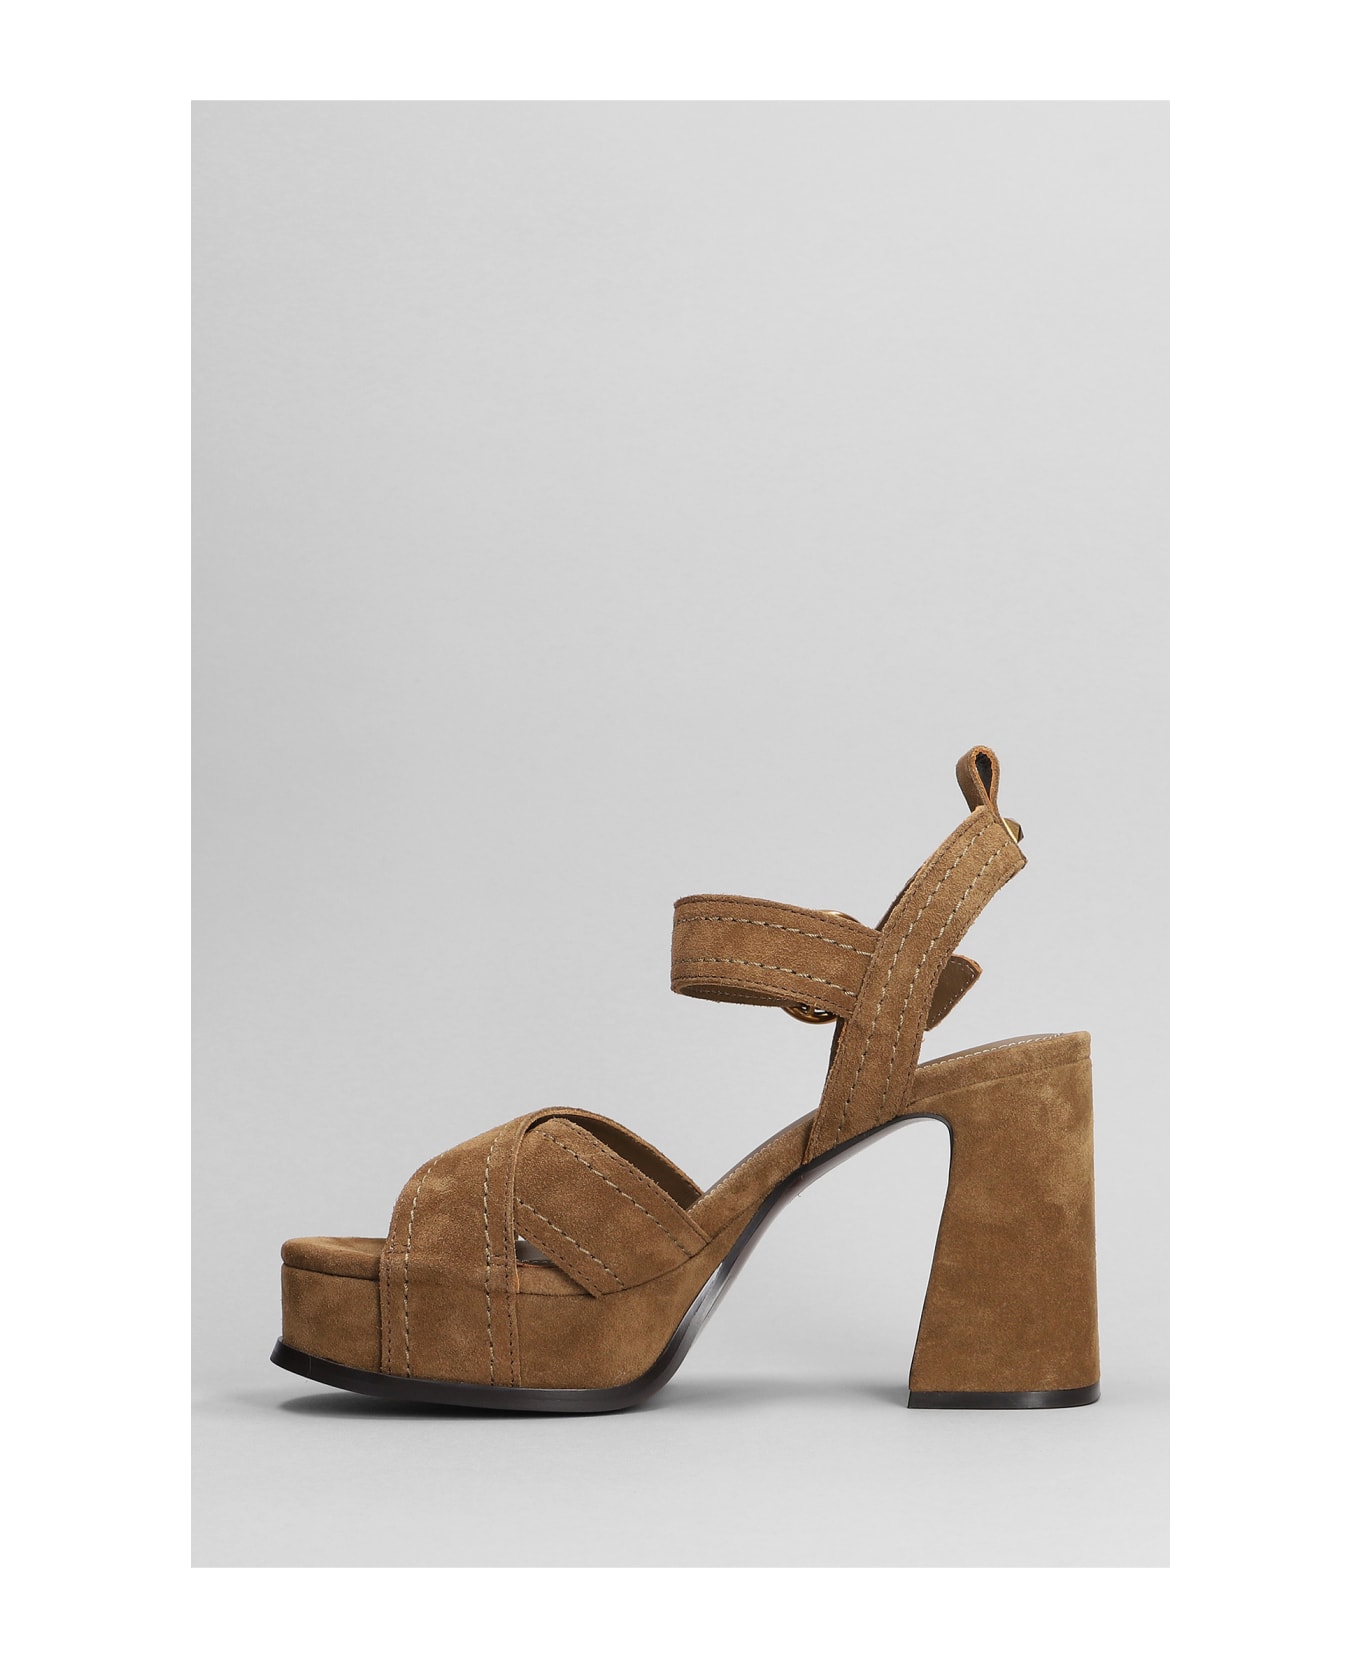 Ash Melany Sandals In Brown Suede - brown サンダル